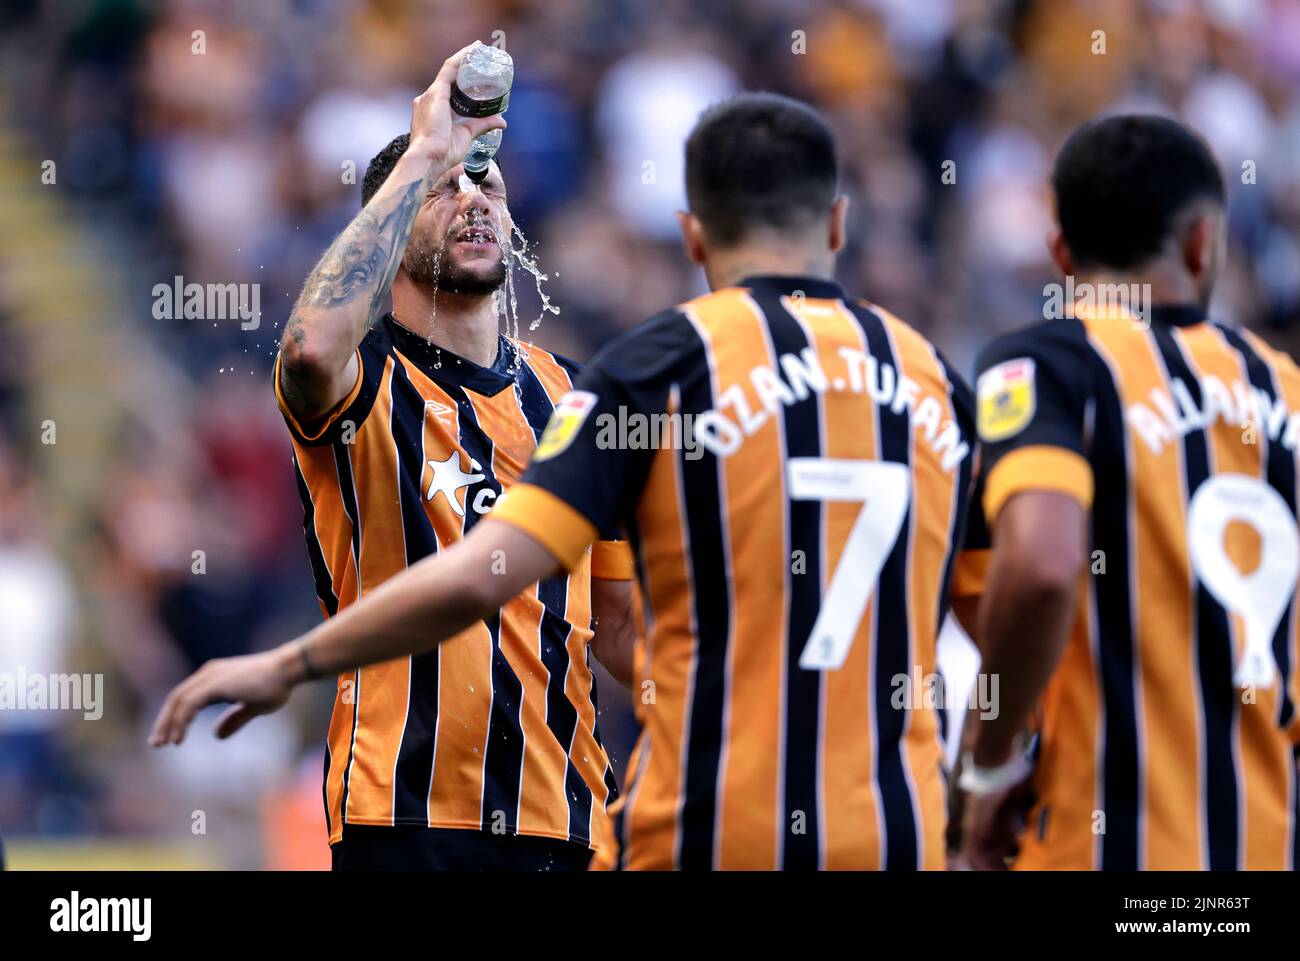 Hull City's Tobias Figueiredo pours water on his face to cool down during the Sky Bet Championship match at the MKM Stadium, Hull. Picture date: Saturday August 13, 2022. Stock Photo